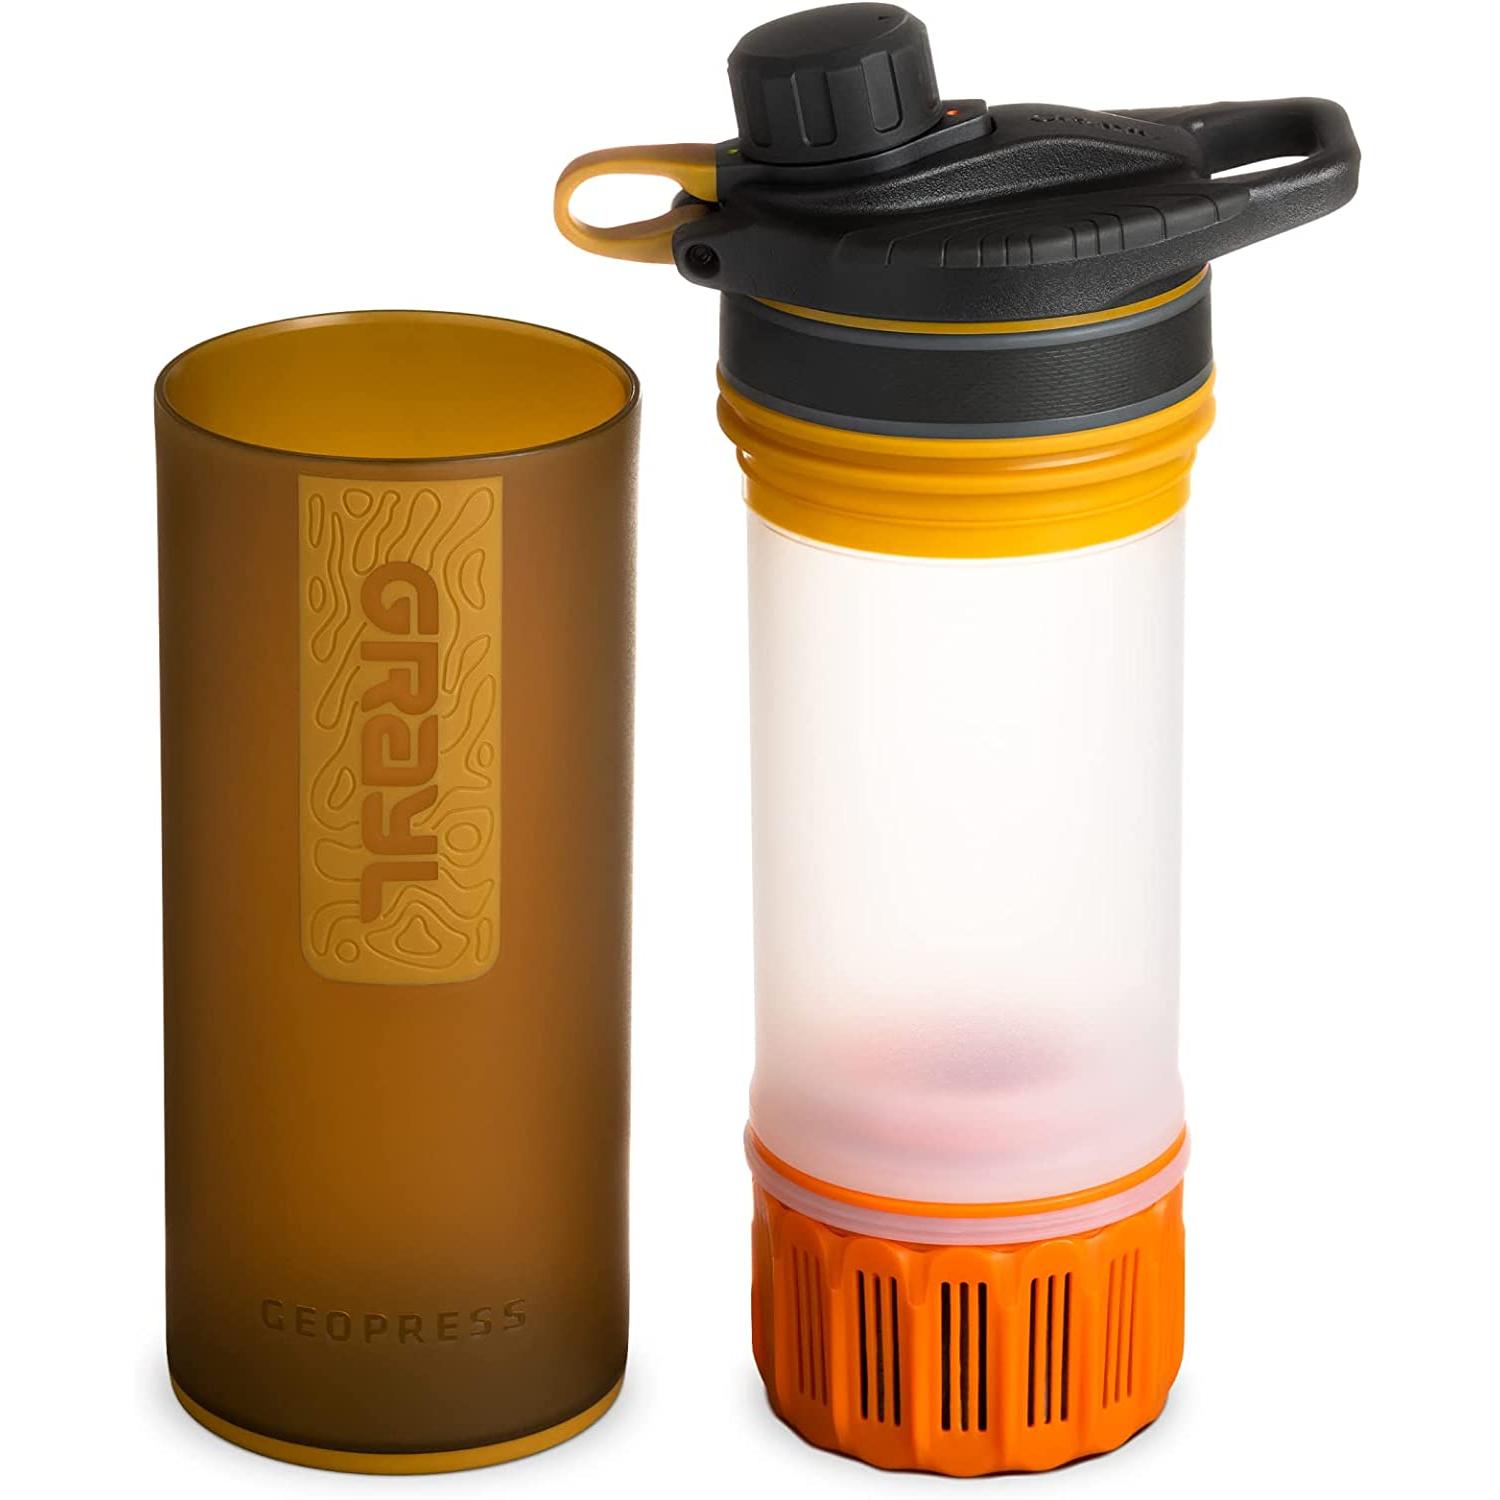 GRAYL Geopress 24 oz Water Purifier for Global Travel, Backpacking, Hiking, and Survival